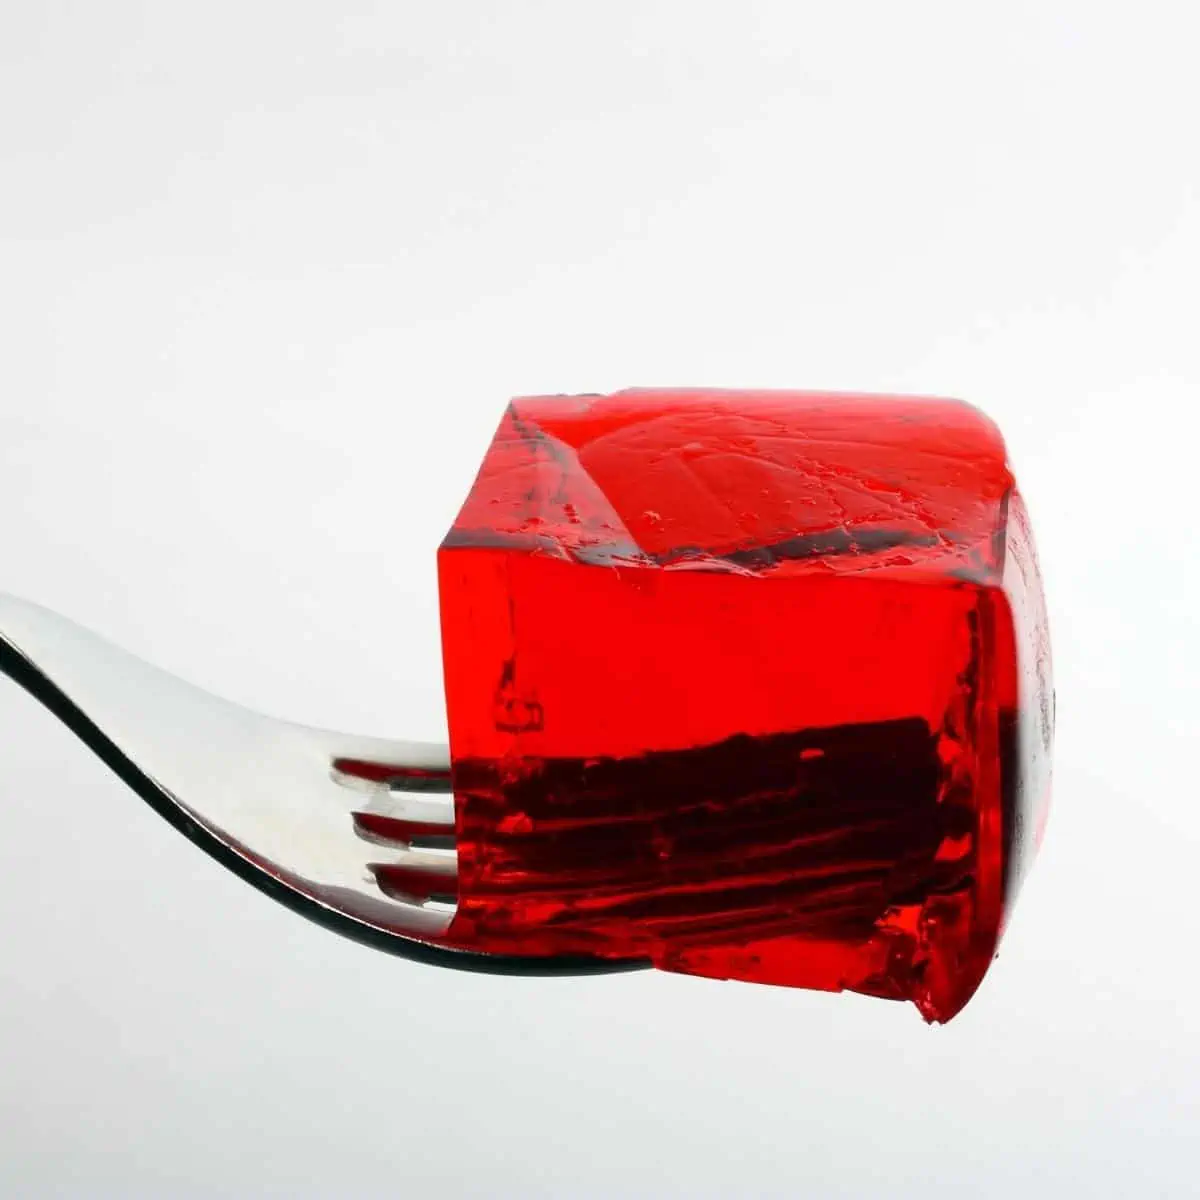 Red cube of jello balancing on a fork. 